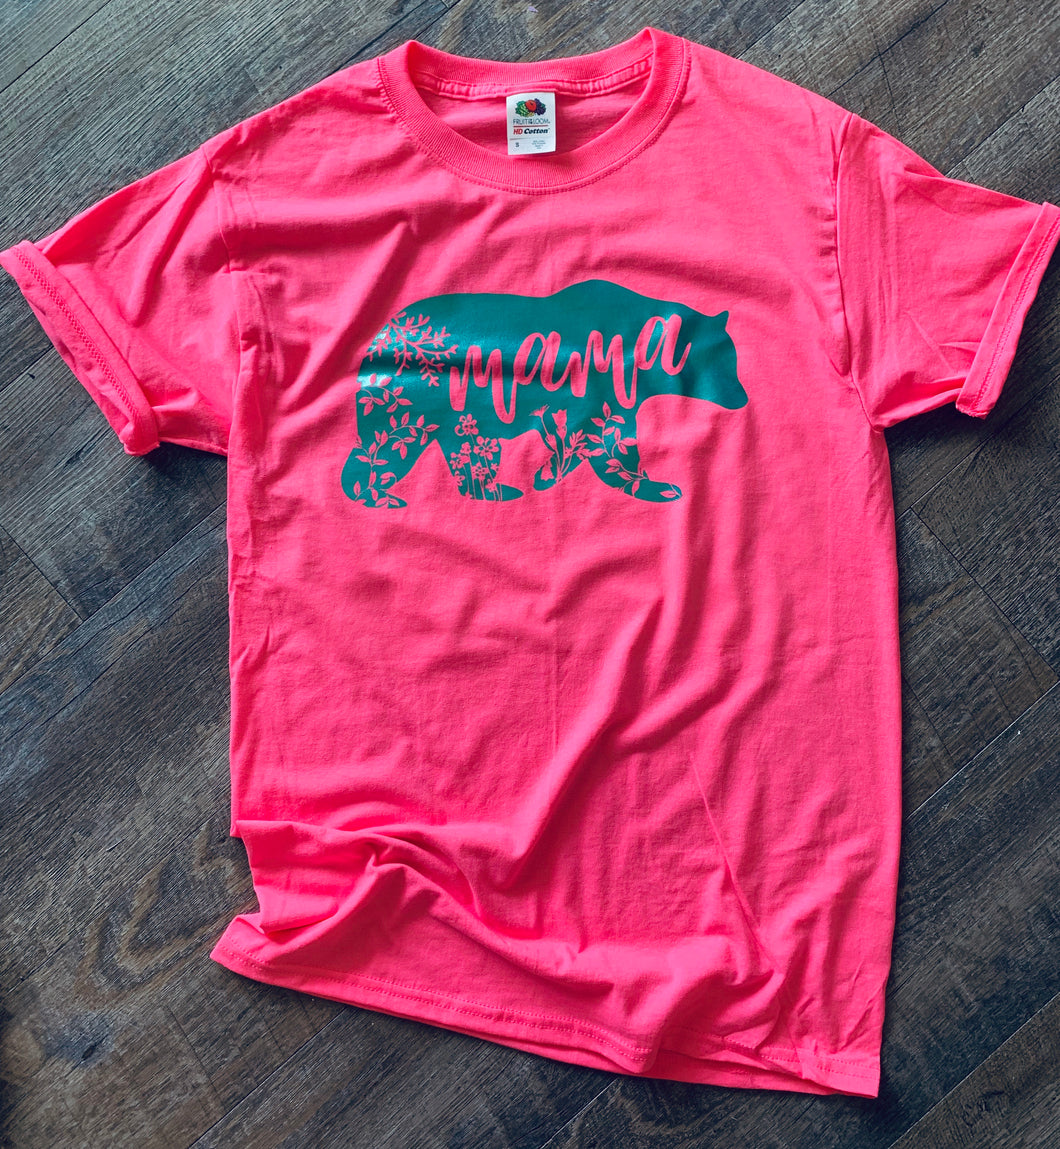 Mama bear floral silhouette graphic tee. Neon pink and teal. - Mavictoria Designs Hot Press Express